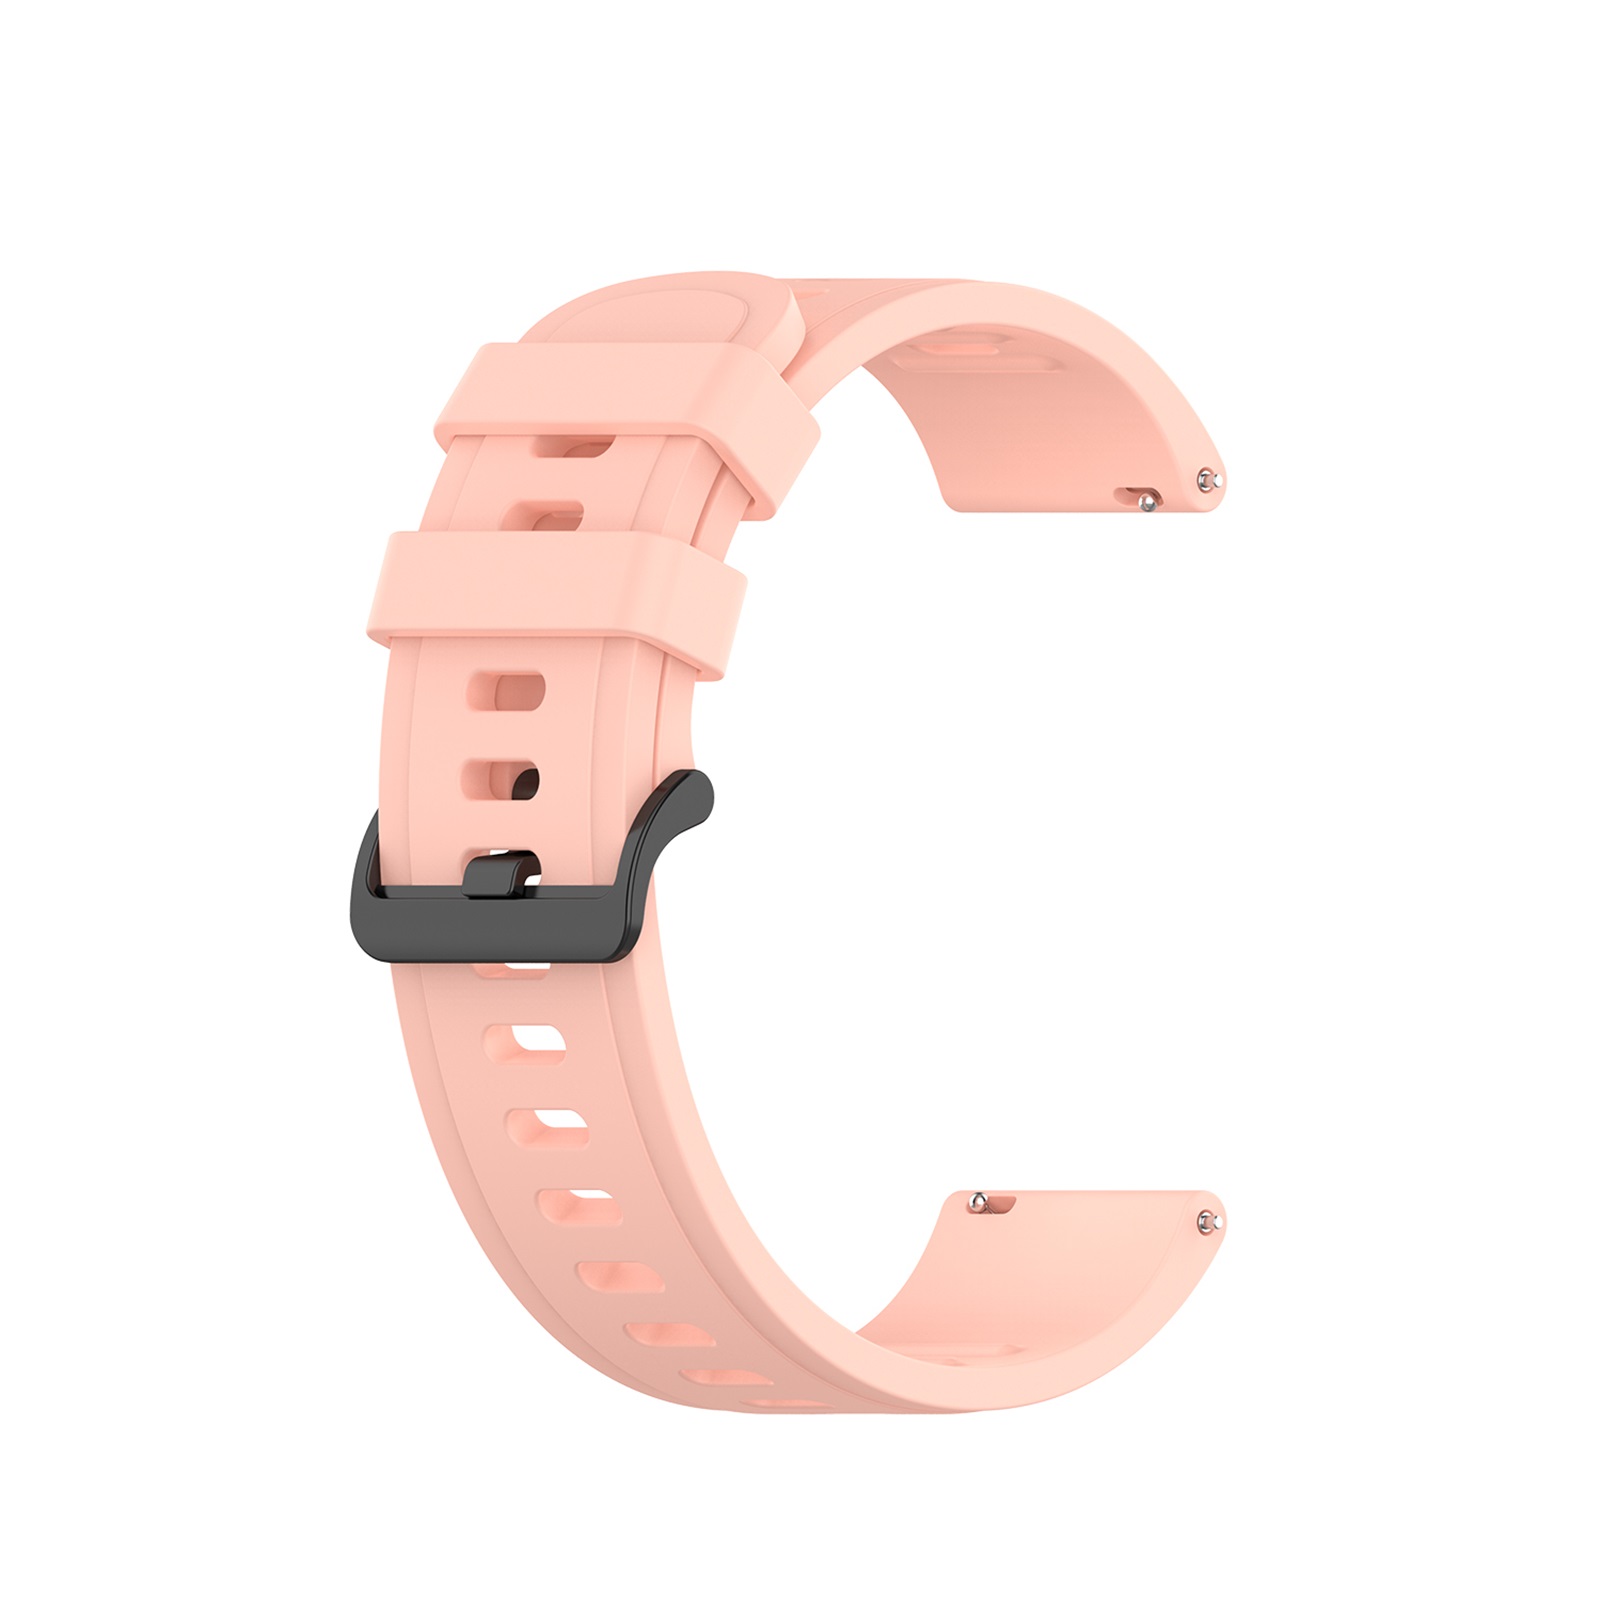 Bakeey-20mm-Multi-color-Silicone-Smart-Watch-Band-Replacement-Strap-For-Zeblaze-GTR--Haylou-LS02-1785338-31